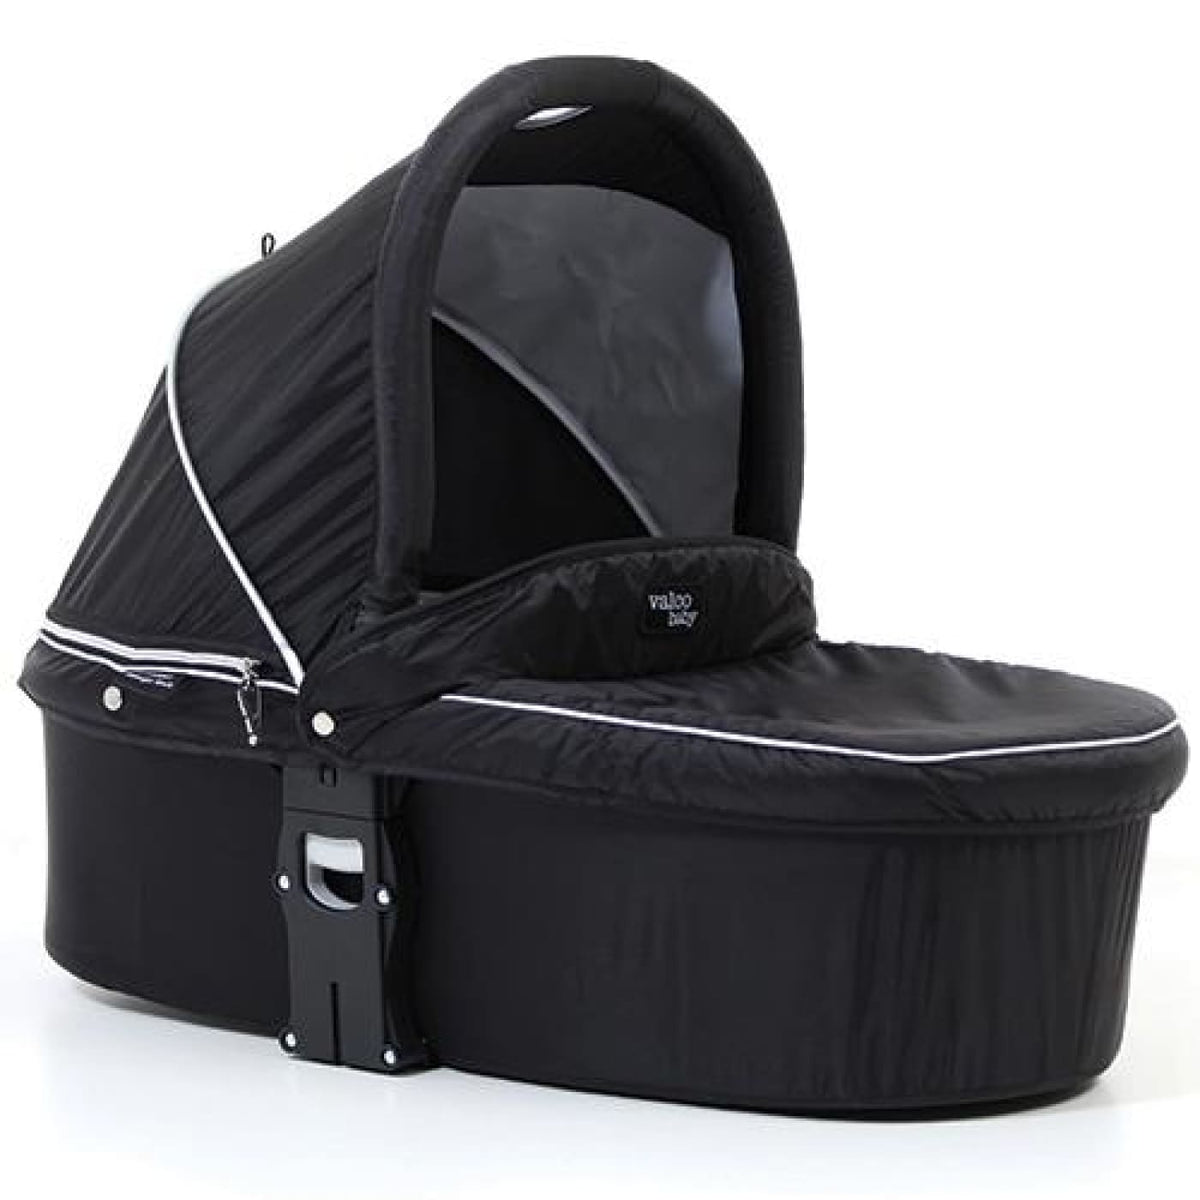 Valco Baby Q Bassinet - Midnight Black - PRAMS &amp; STROLLERS - BASS/CARRY COTS/STANDS